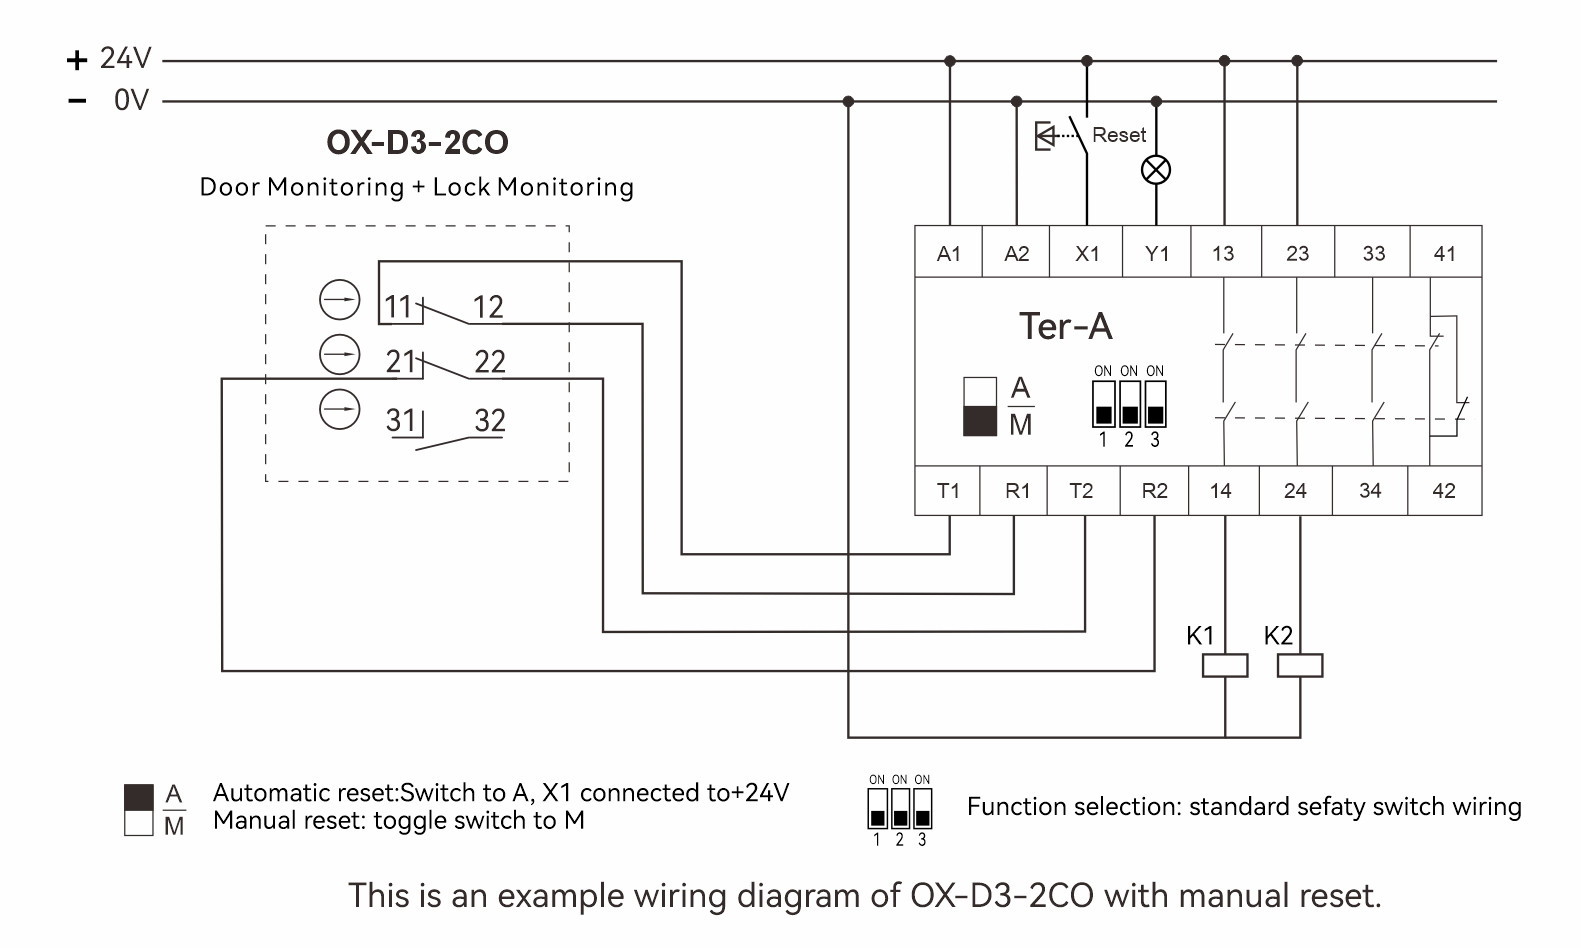 Wiring Diagram Between The Safety Switch and The Ter-A Safety Relay